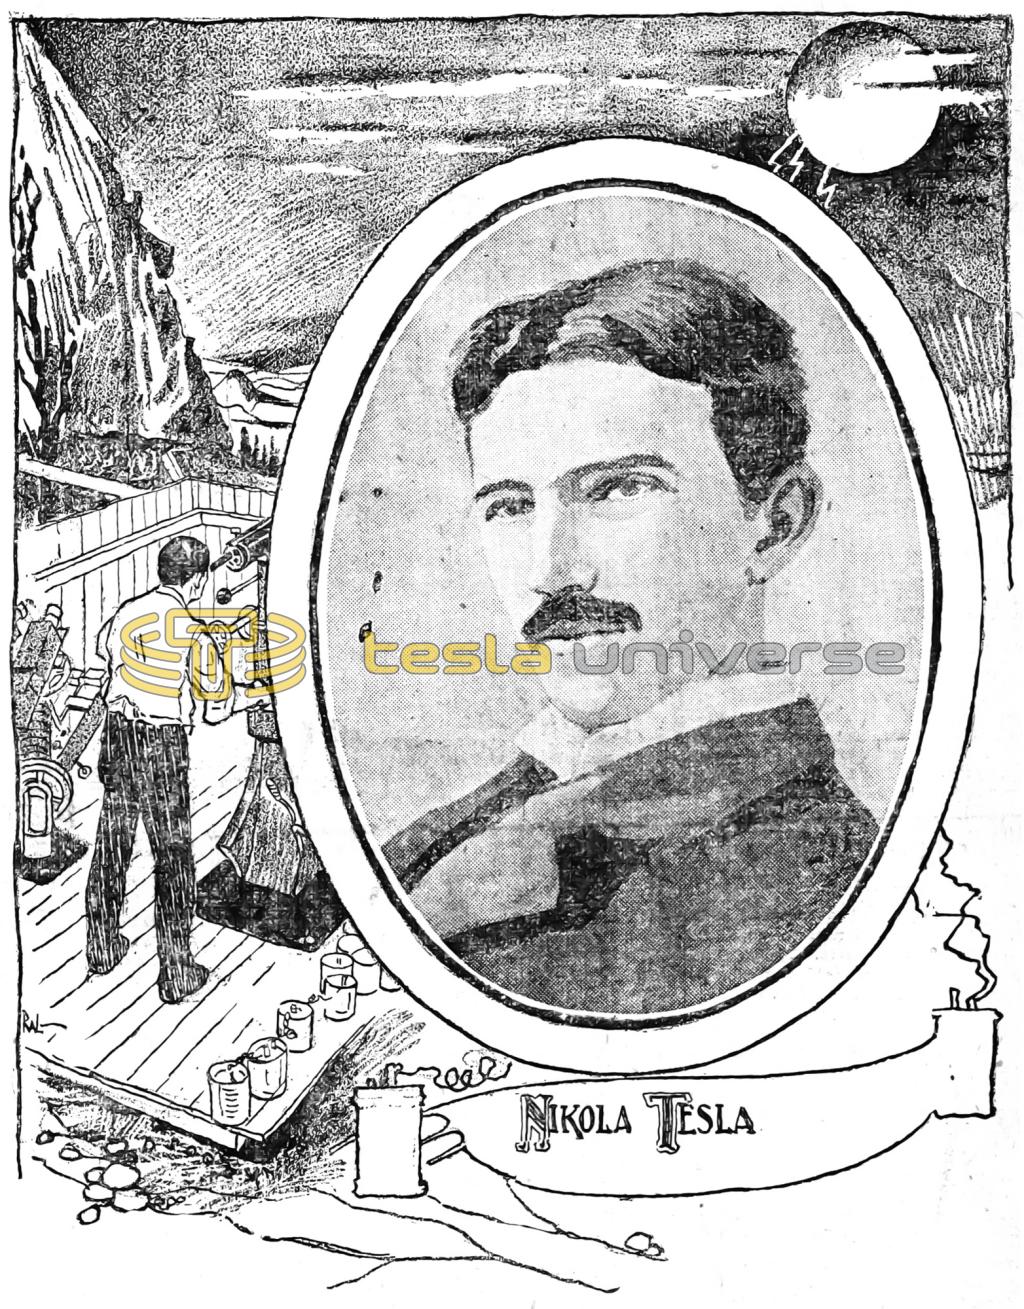 Illustration of Nikola Tesla from around the time of his Colorado Springs experiments